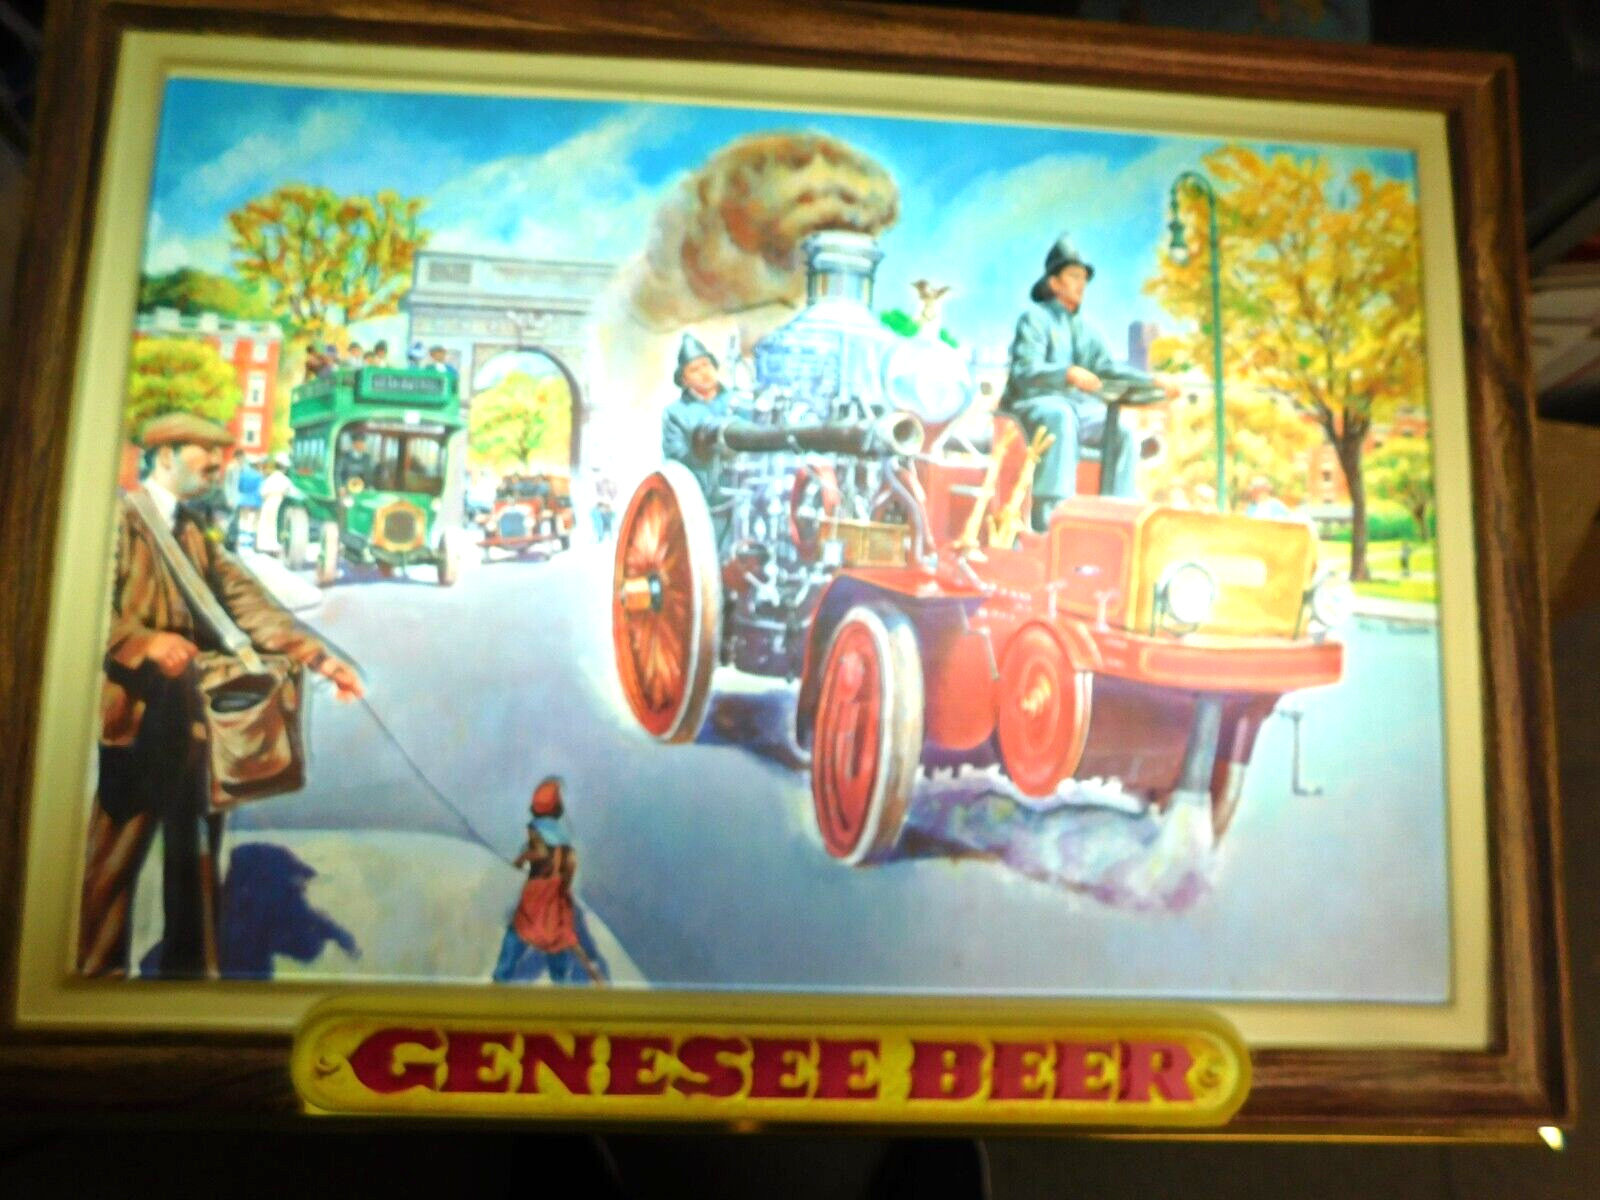 VINTAGE GENESEE BEER SHADOW BOX LIGHT UP SIGN, FIREFIGHTER RESPONDING, A BEAUTY